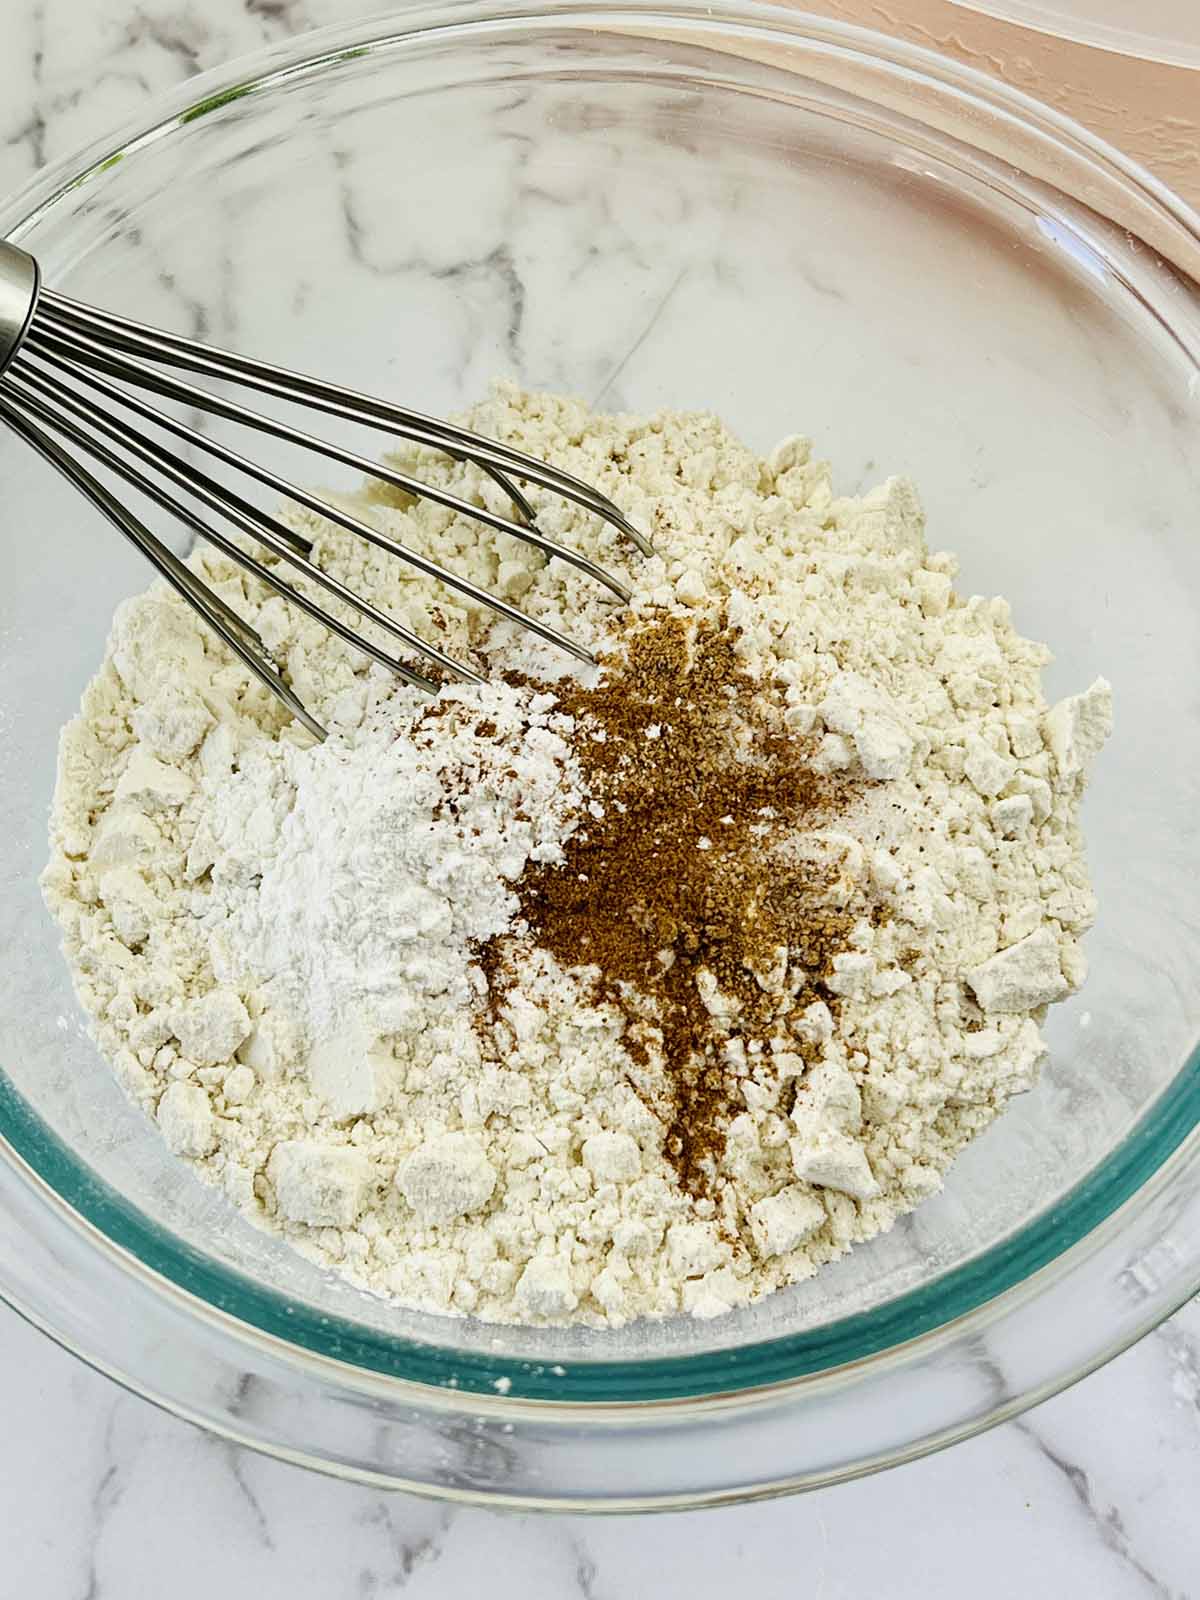 The dry ingredients in a mixing bowl with a whisk.